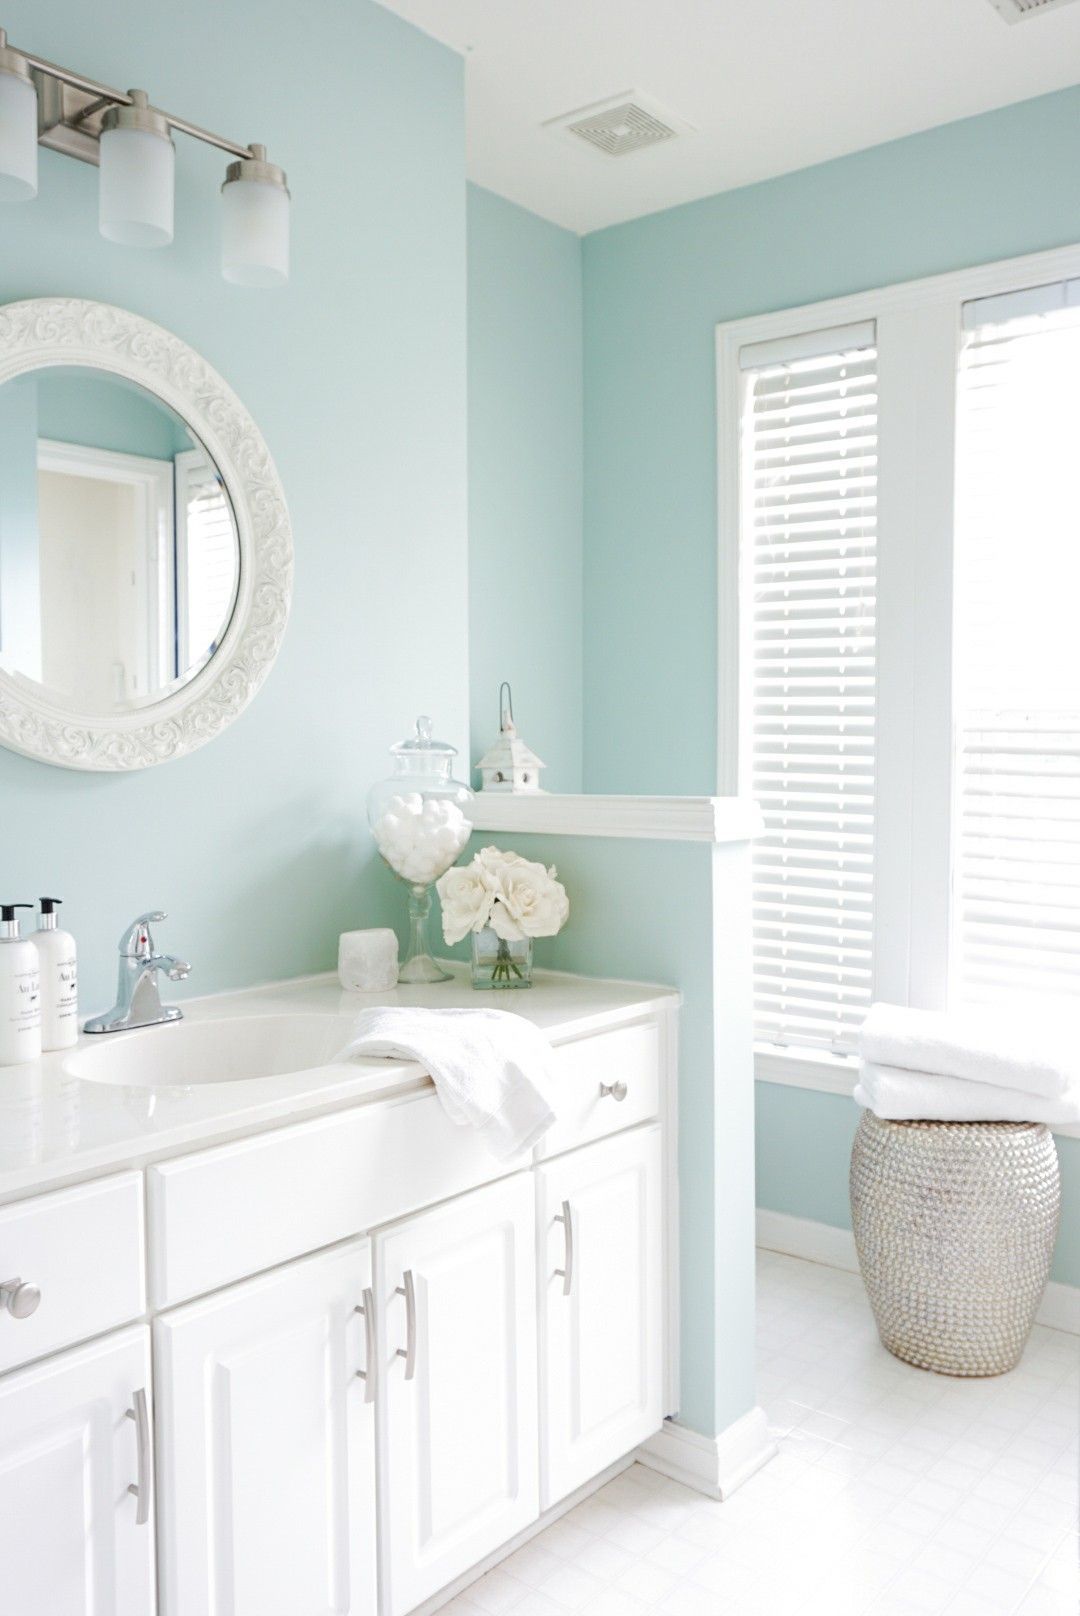 √ Bathroom Color Ideas - BEST Paint and Color Schemes for Bathroom